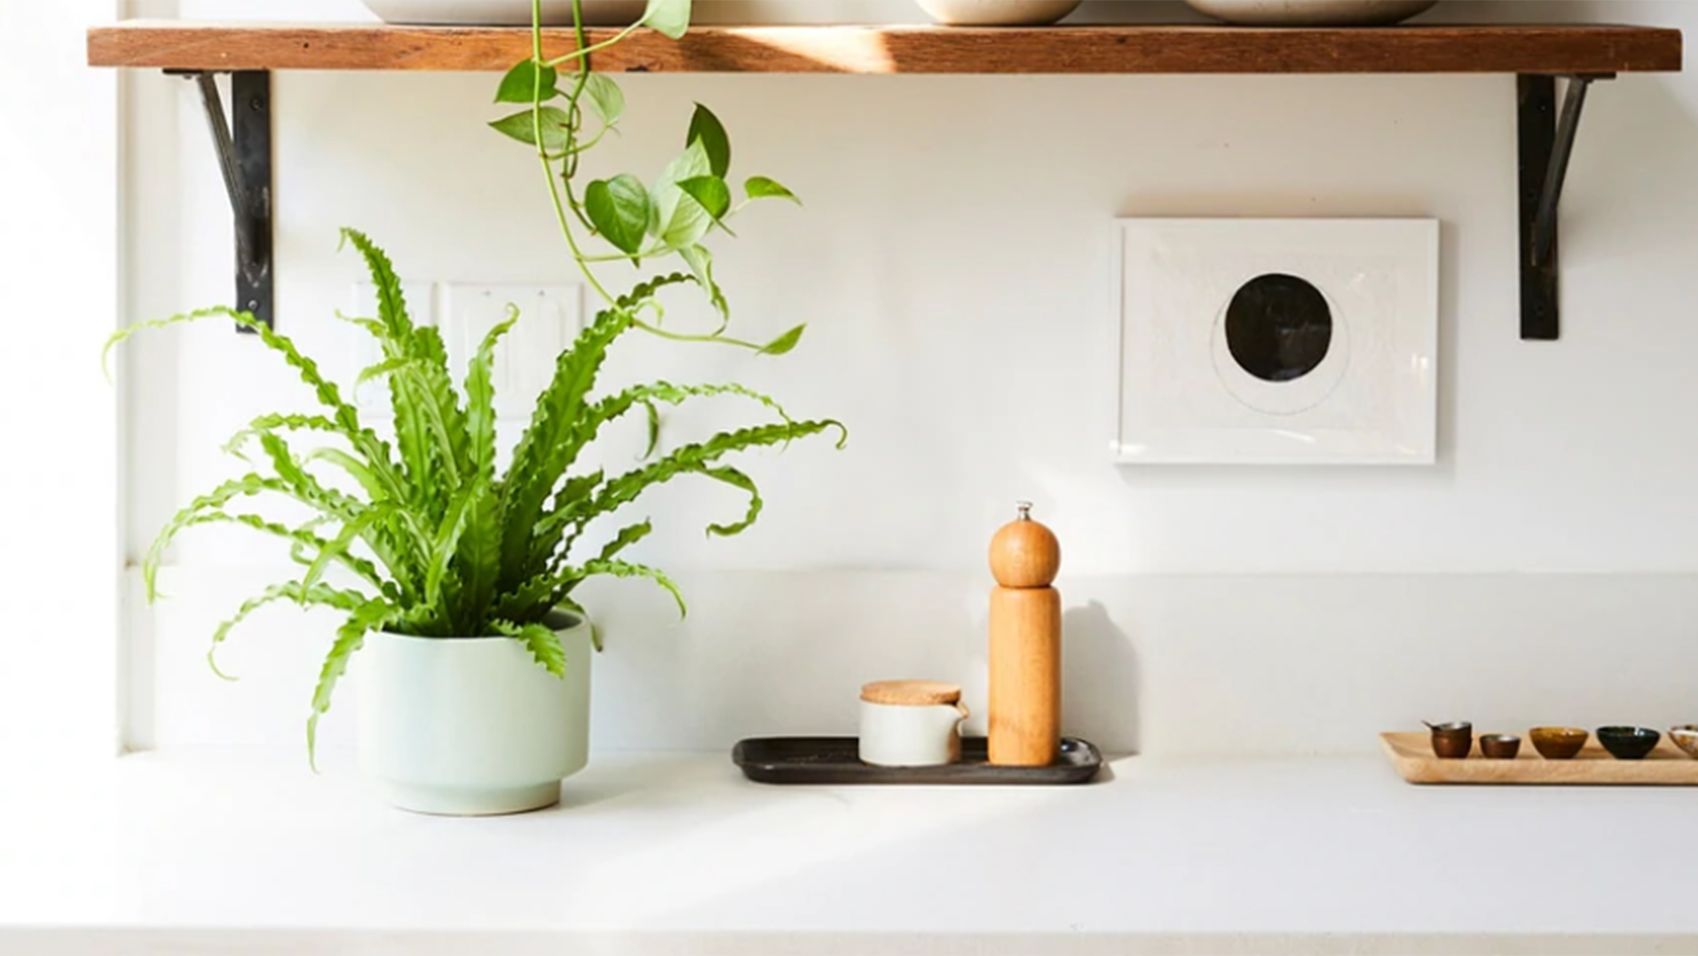 16 best pet friendly houseplants safe for cats and dogs | CNN Underscored